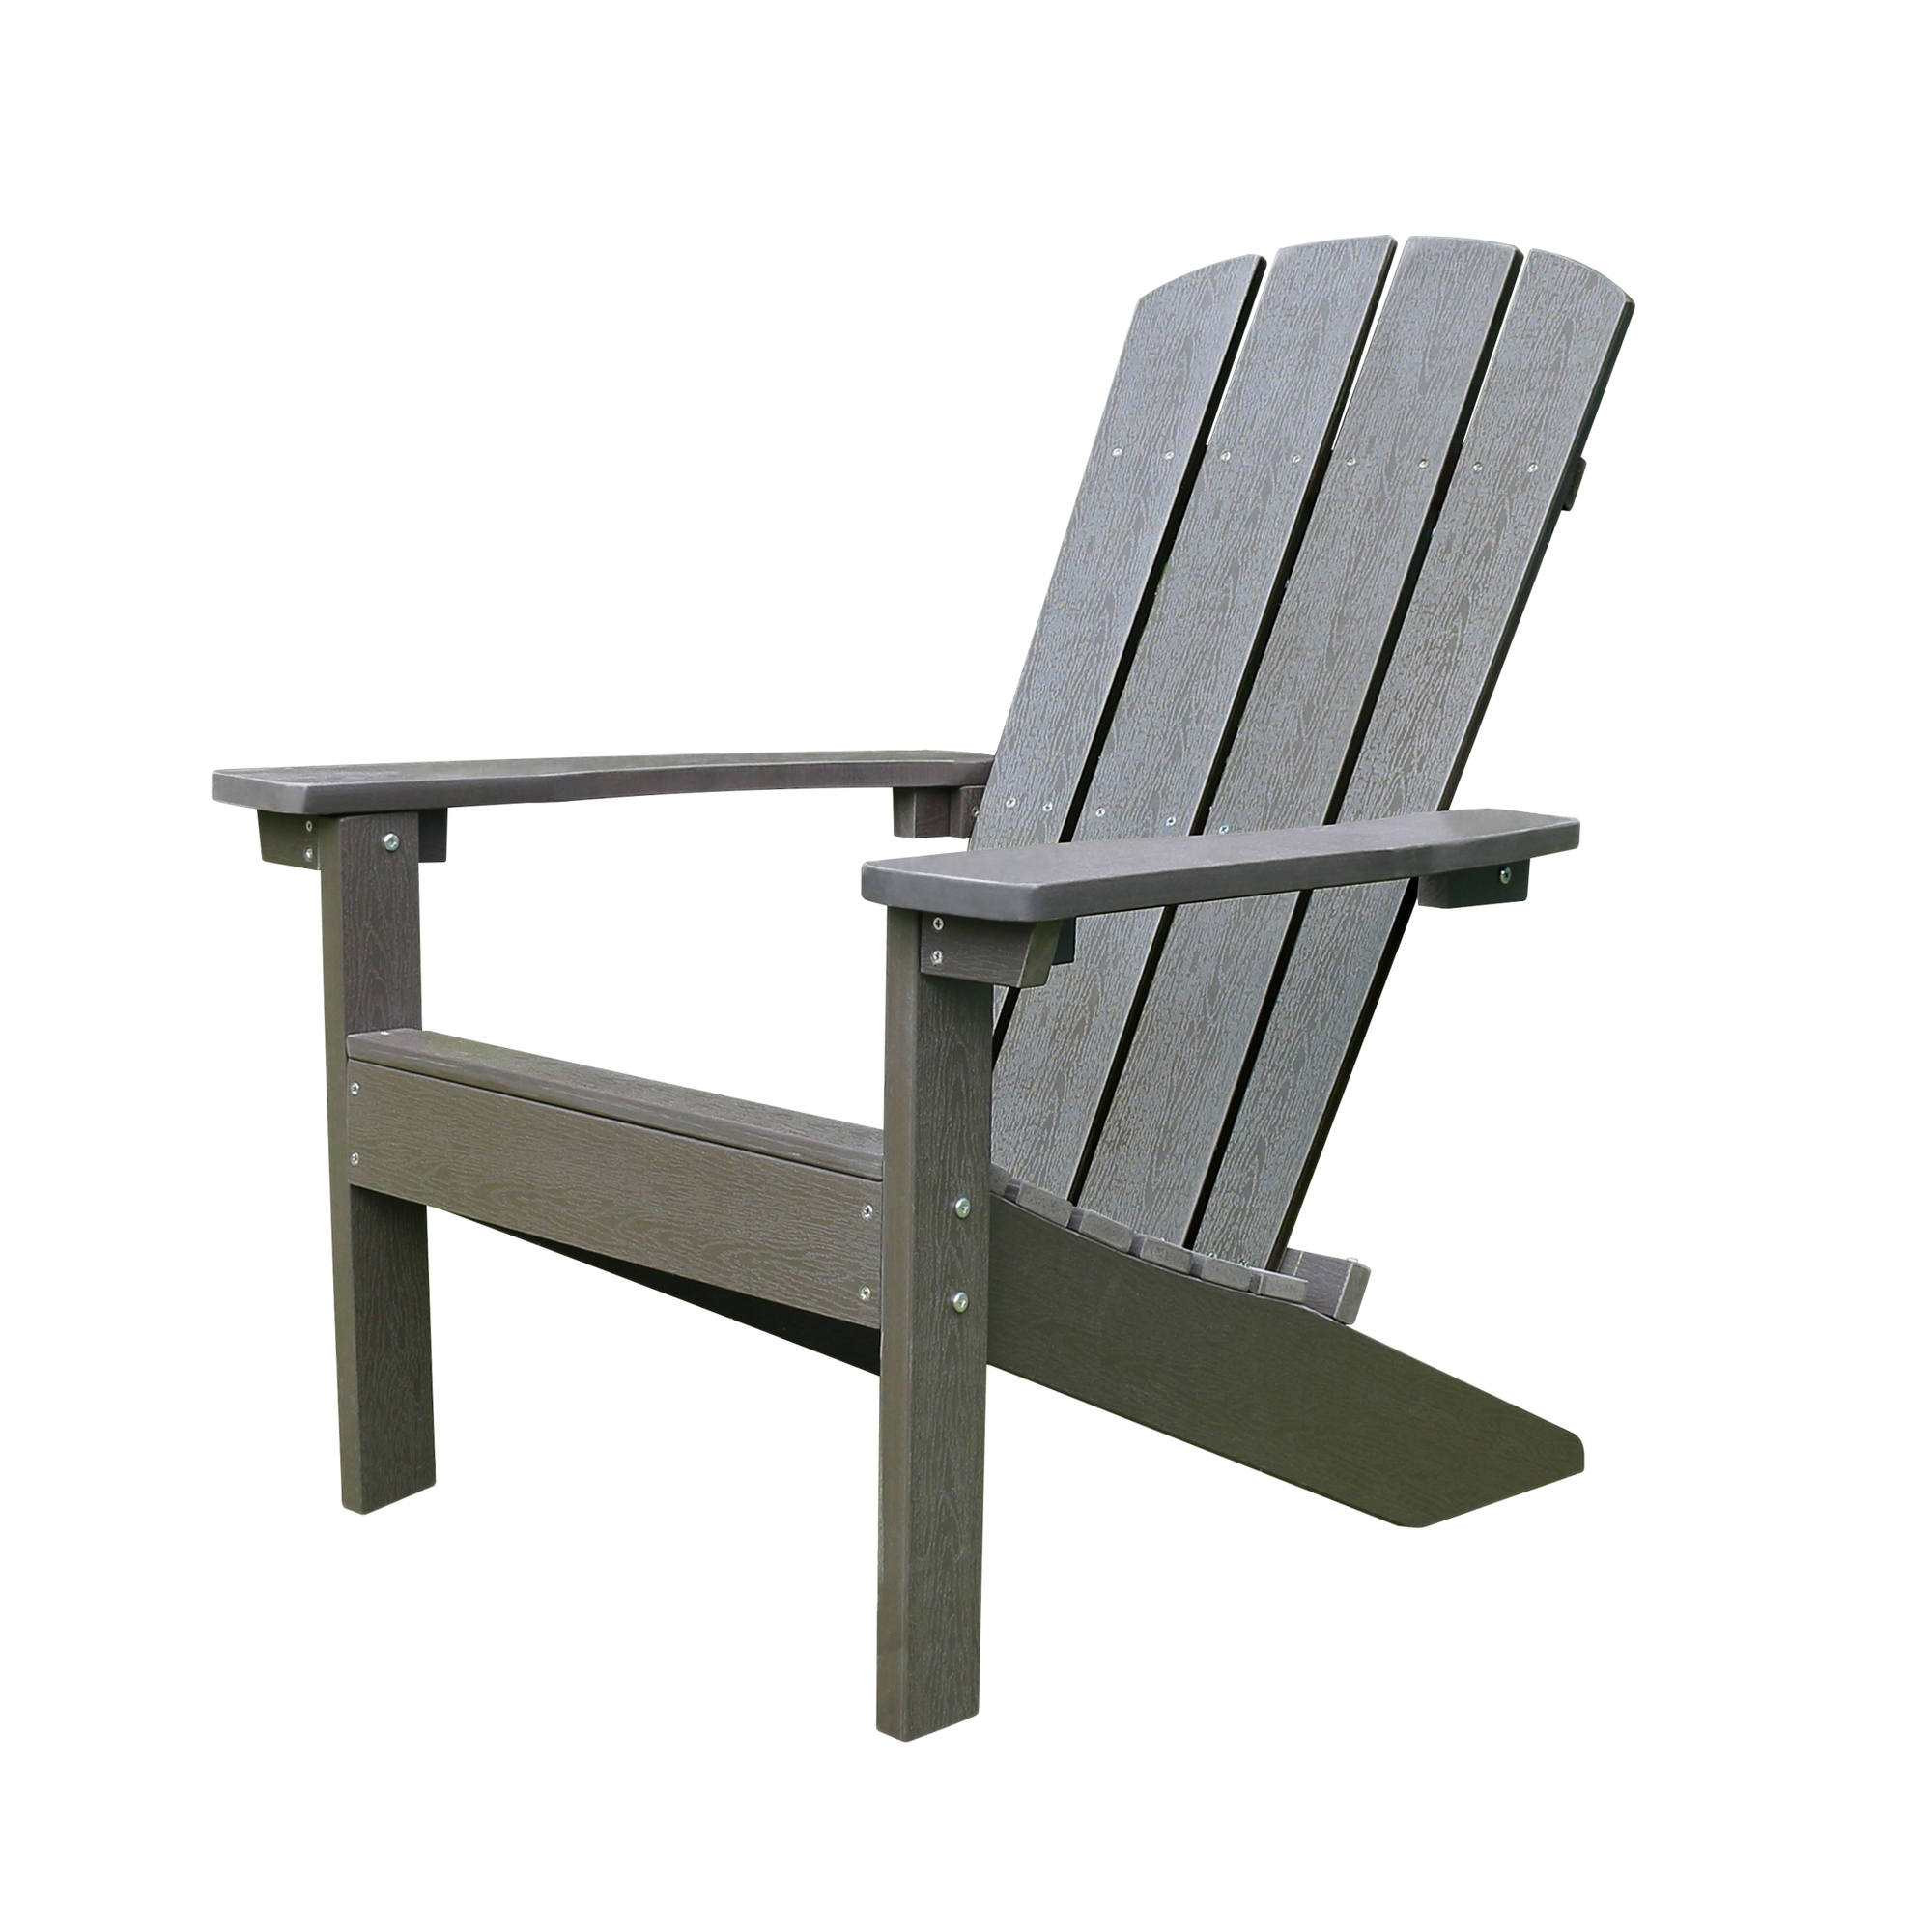 Merry Products, Lakeside Faux Wood Adirondack Chair, Espresso, Primary Color Espresso, Included (qty.) 1, Model ADC0561120810